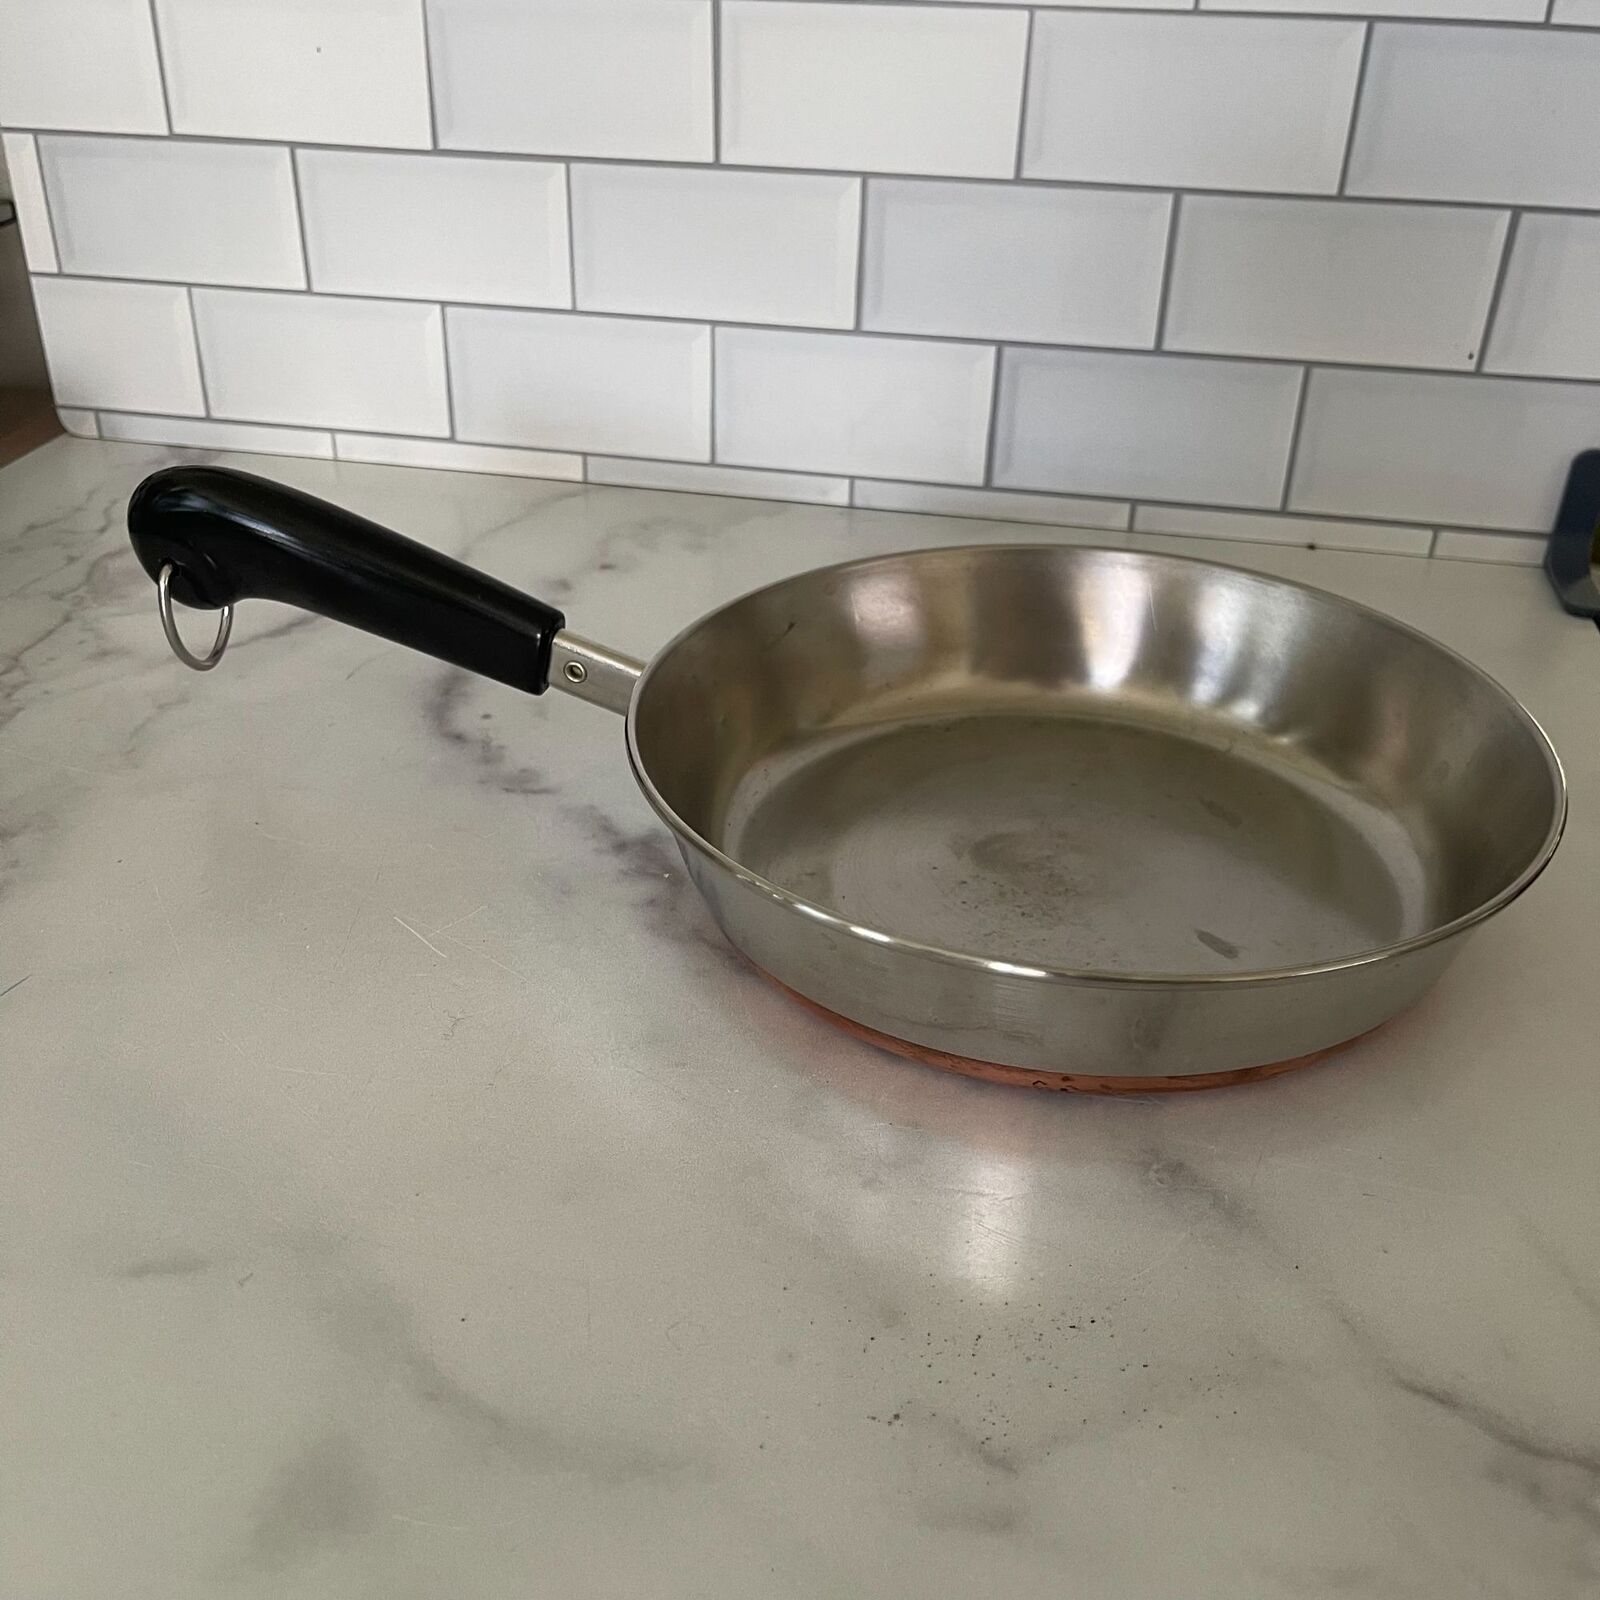 Vintage Revere Ware Copper Clad Stainless Steel Fry Pan 8